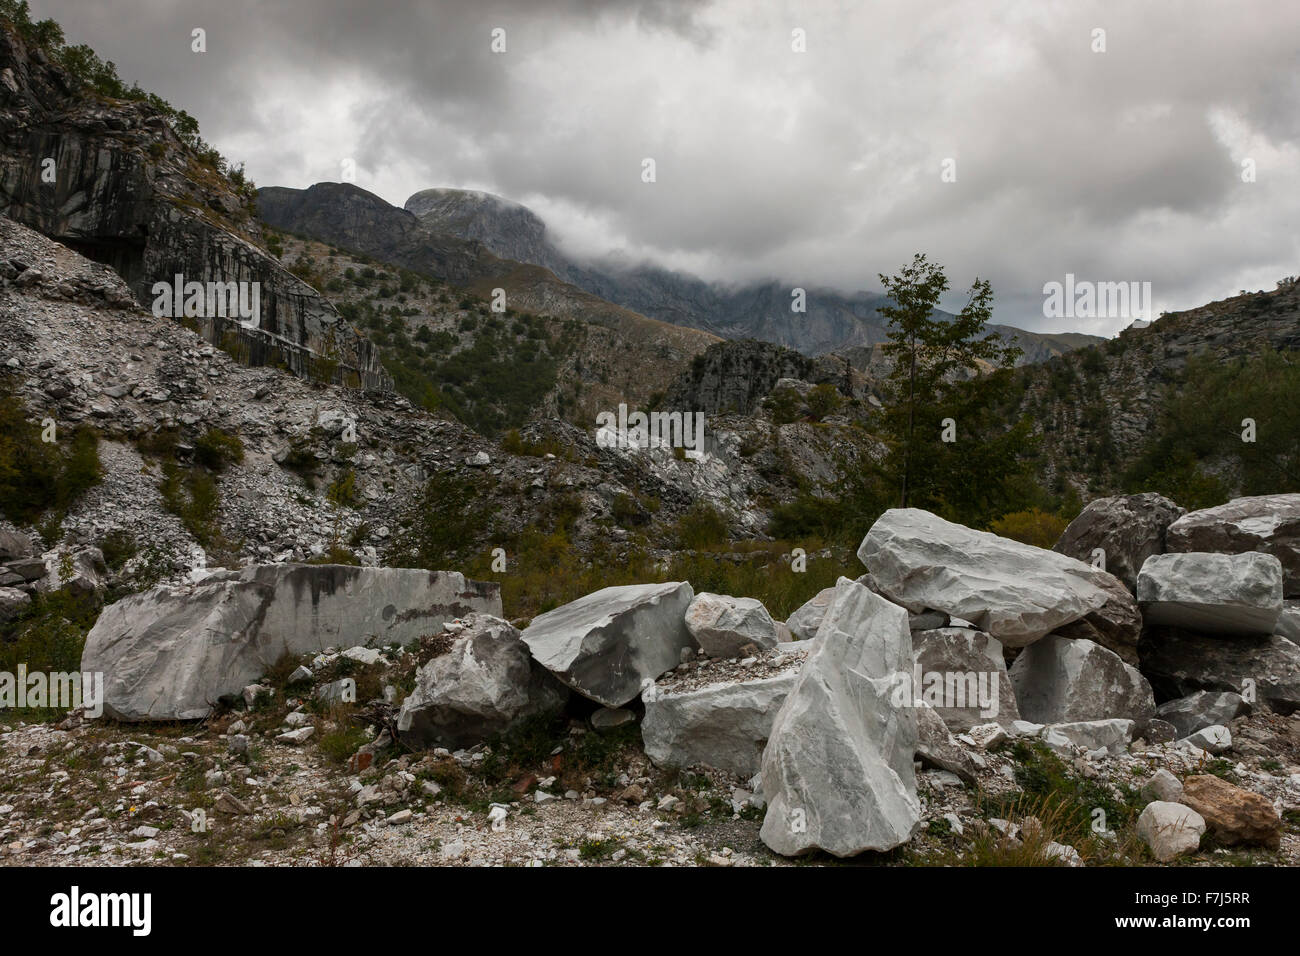 Marble quarries of the Apuan Alps, Tuscany. Stock Photo